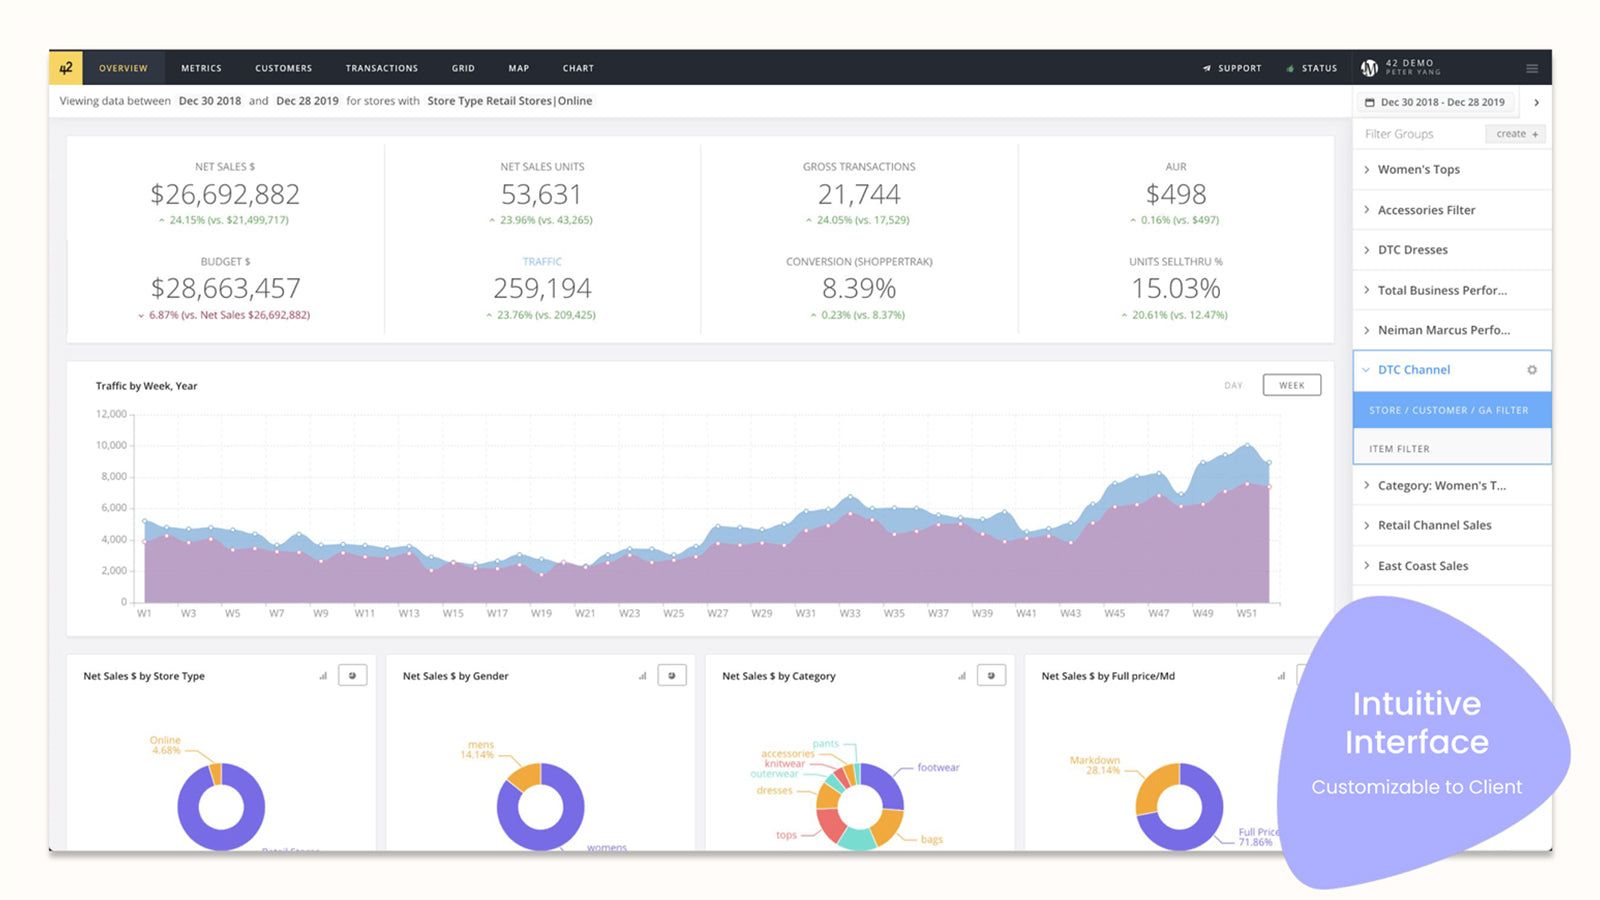 42 analytics and reporting with graphs and executive overview